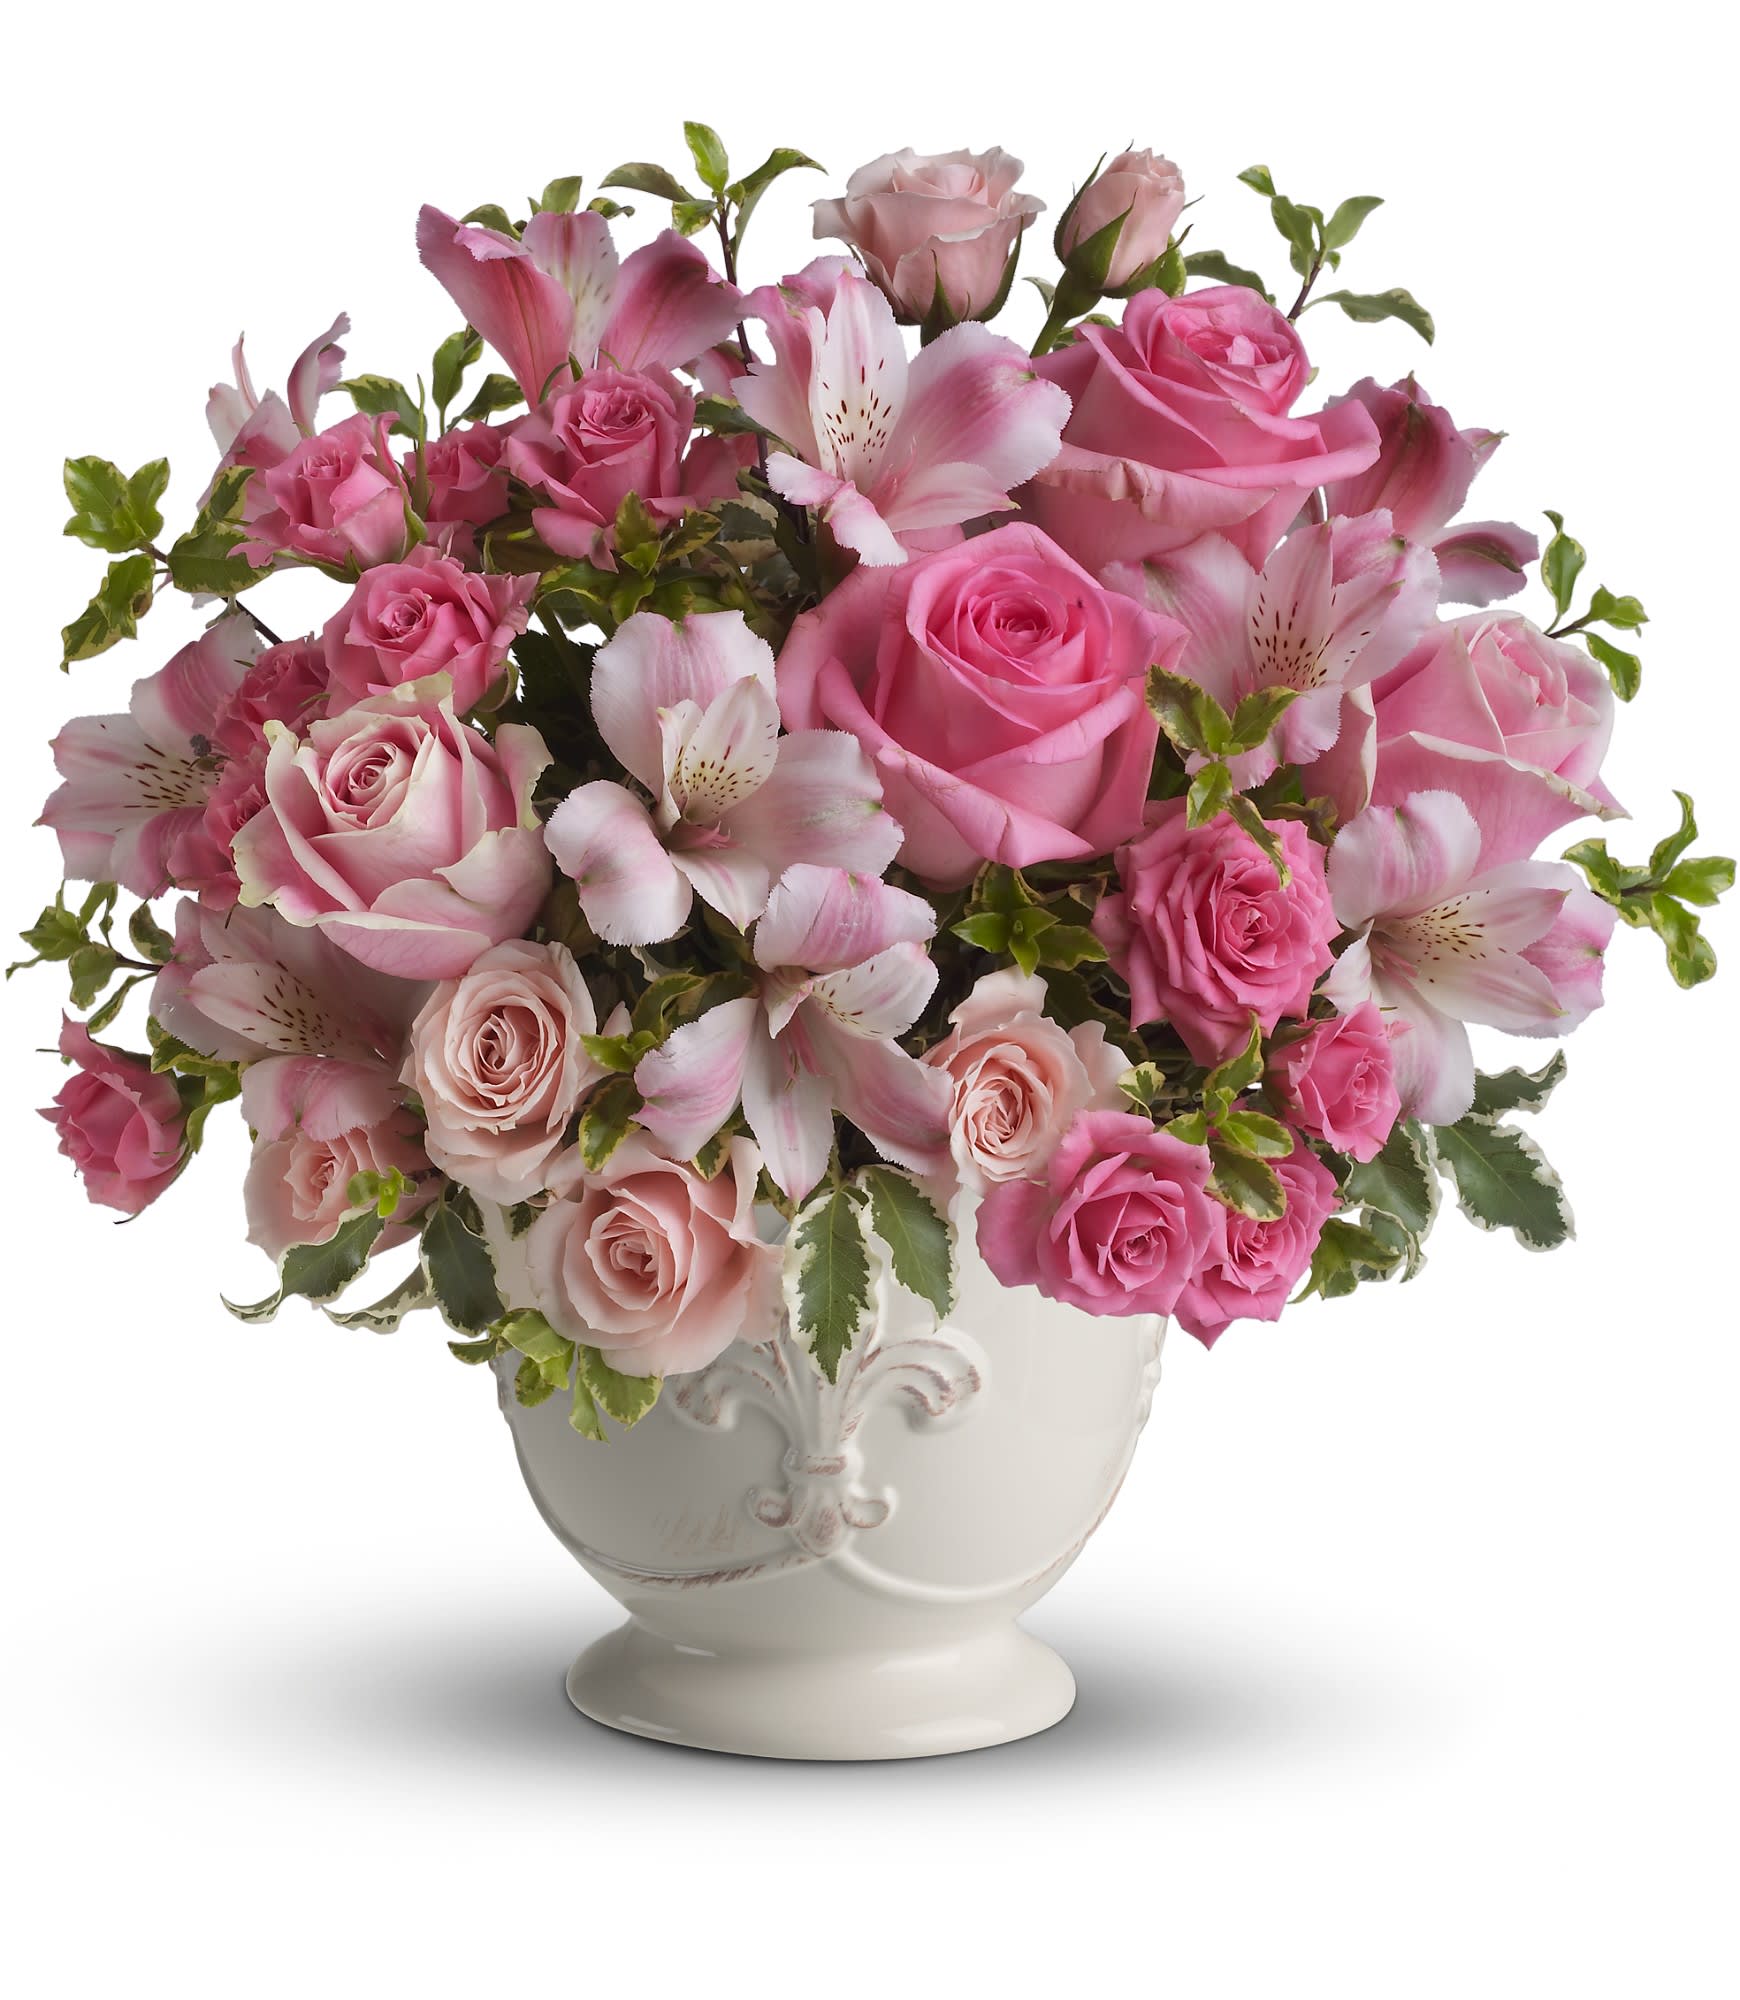  Pink Potpourri Bouquet with Roses - As strong as it is soft, the color pink as it is featured here creates a loving and utterly feminine tribute. Many shades of pink blossoms blend together for an effect that is beautiful. Color options available- call for details. 